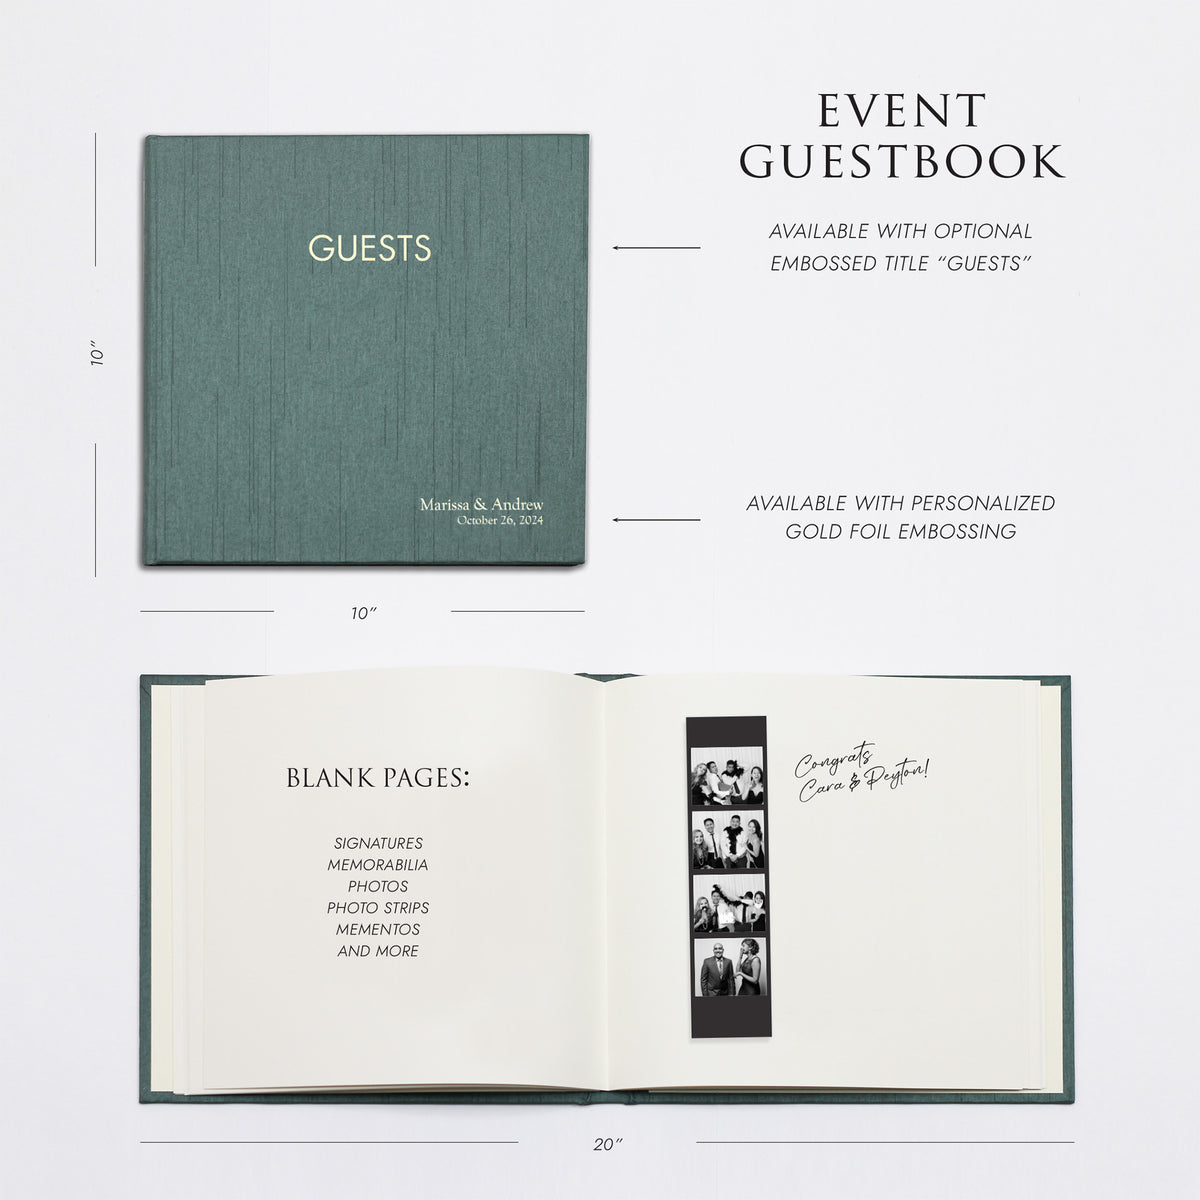 Event Guestbook Embossed with “Guests” | Cover: Jade Silk | Available Personalized